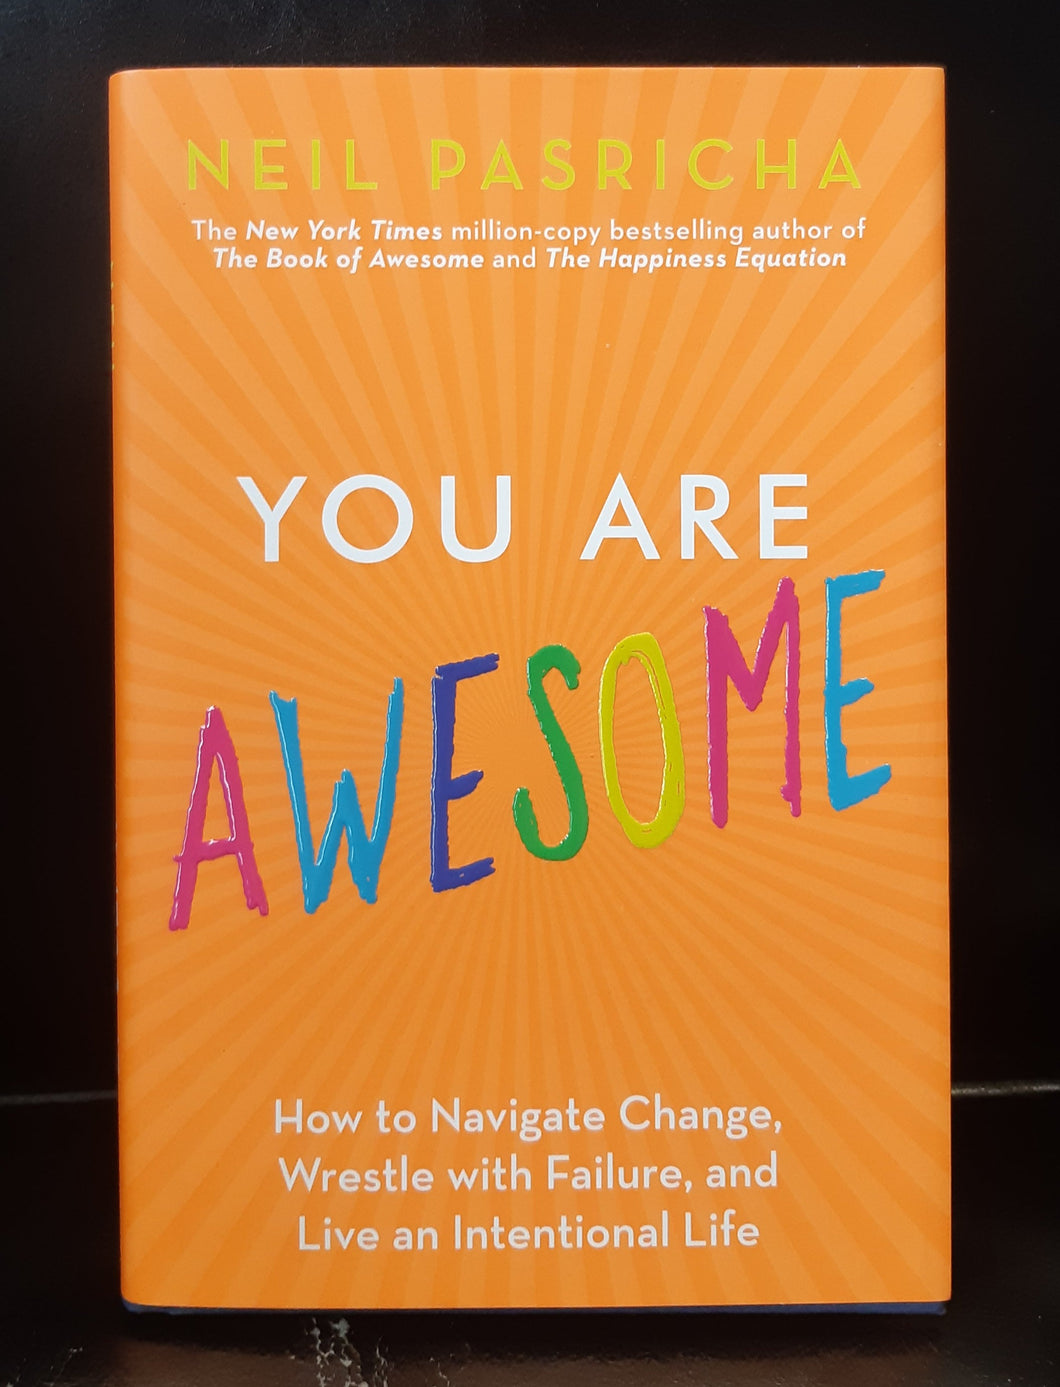 You Are Awesome: How to Navigate Change, Wrestle with Failure, and Live an Intentional Life by Neil Pasricha